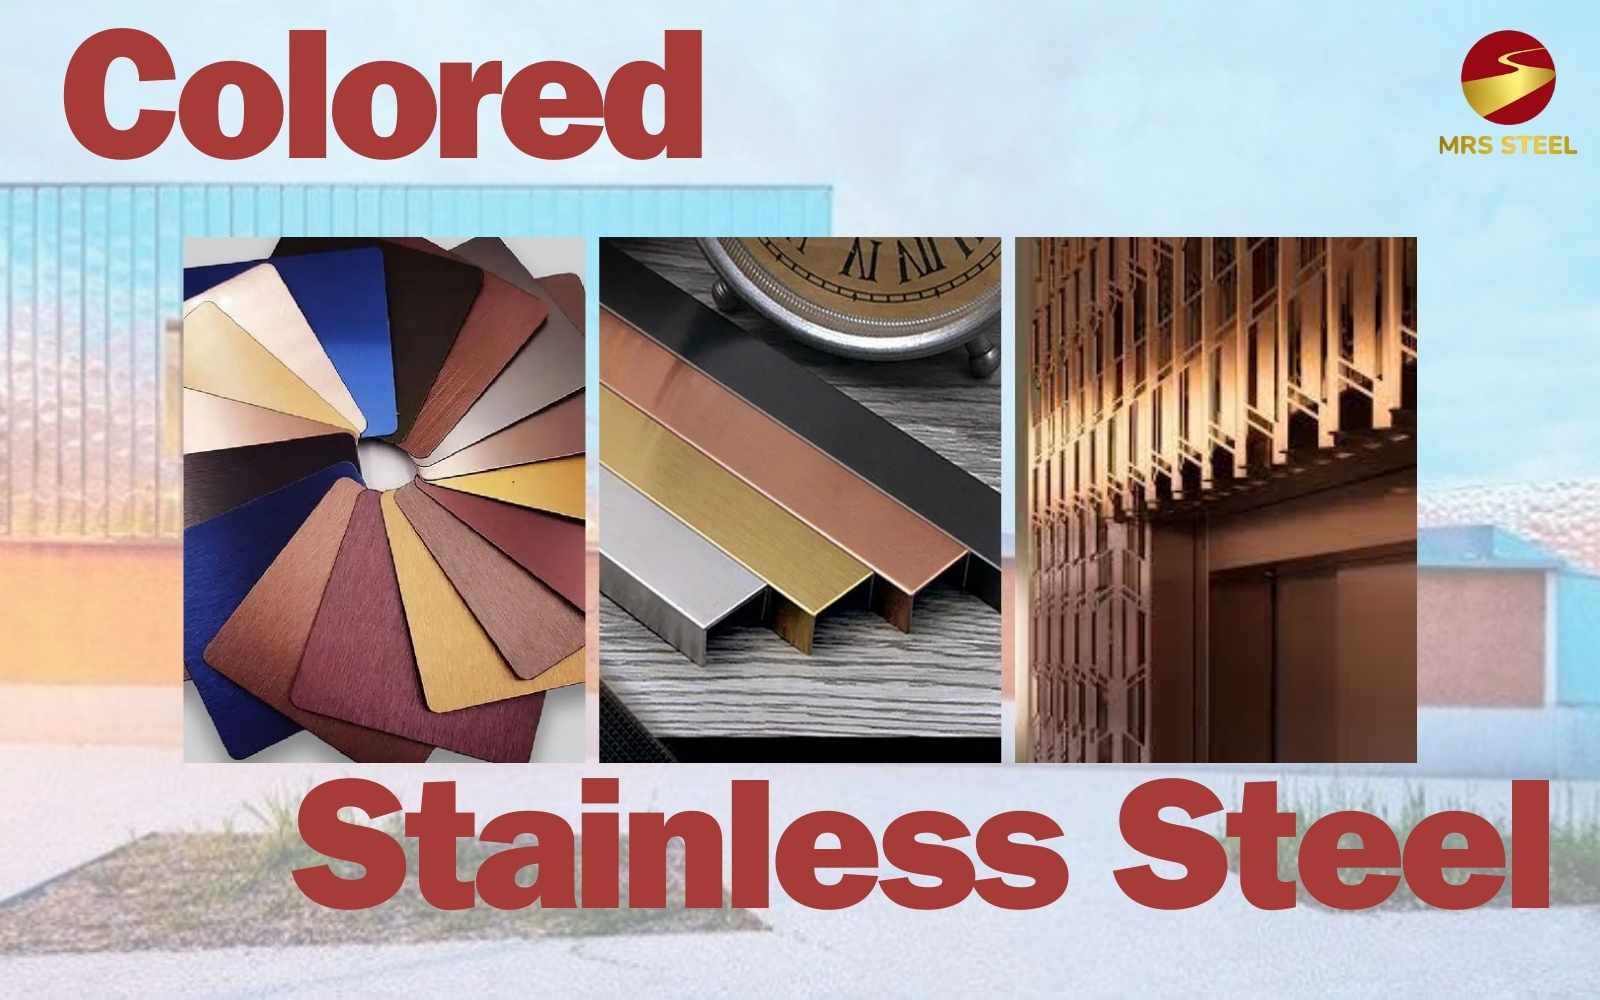 What is colored stainless steel